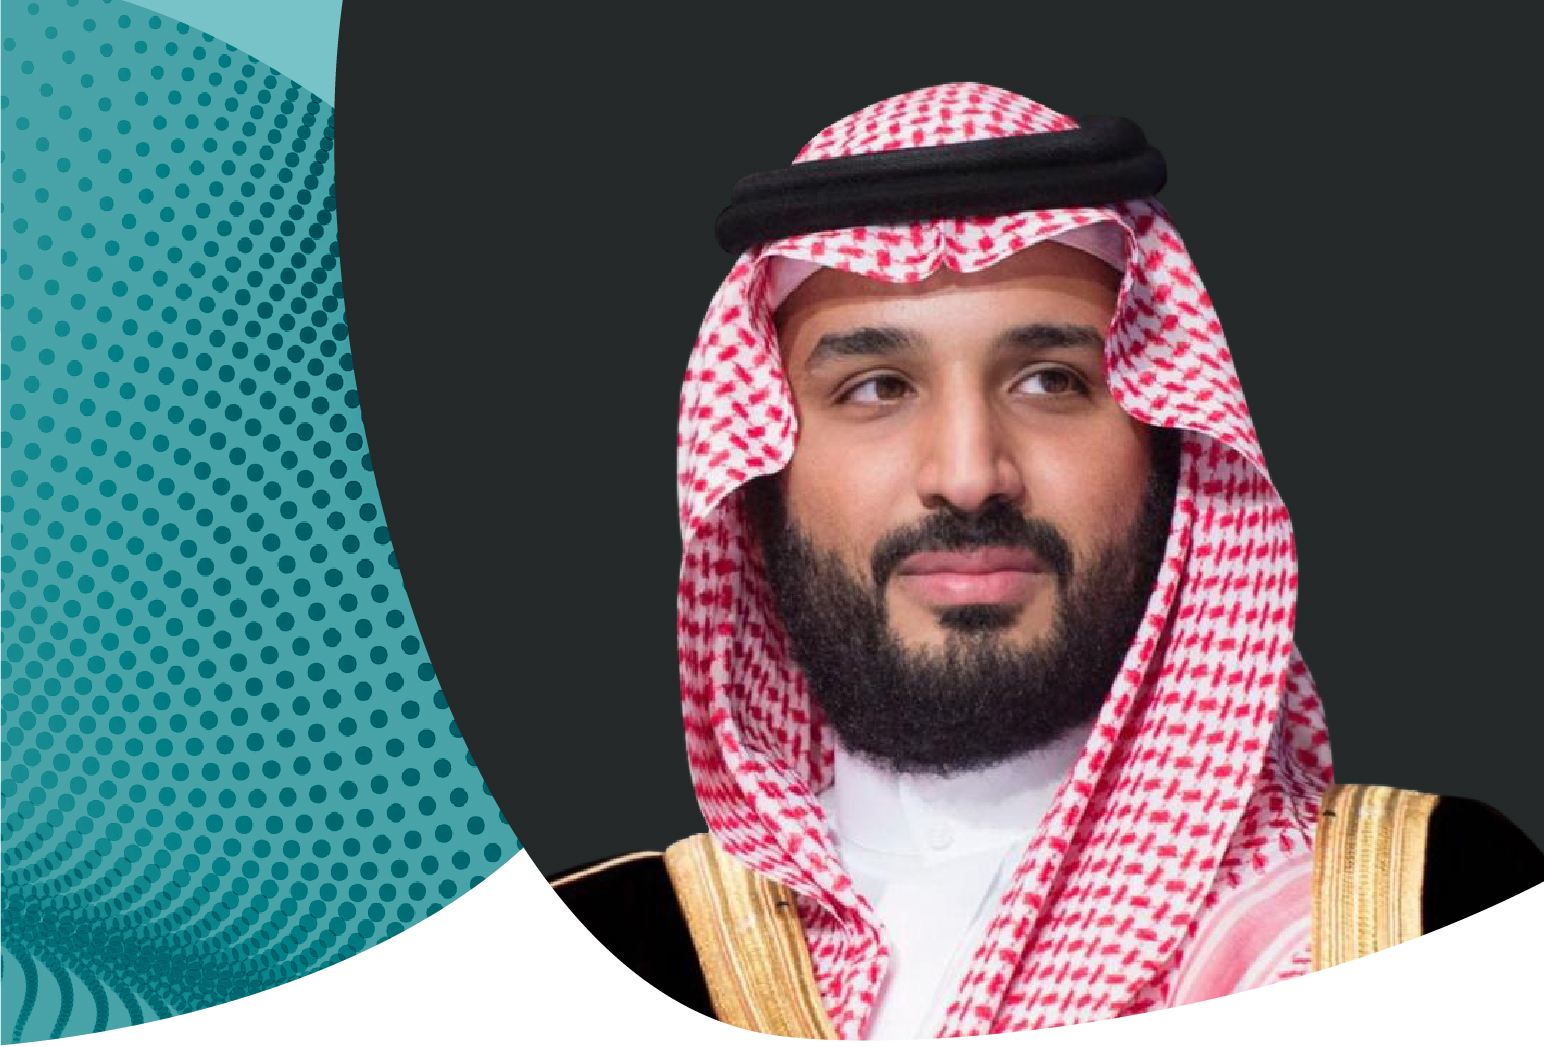 His Royal Highness the Crown Prince launches the new strategy of King Abdullah University of Science and Technology "KAUST"